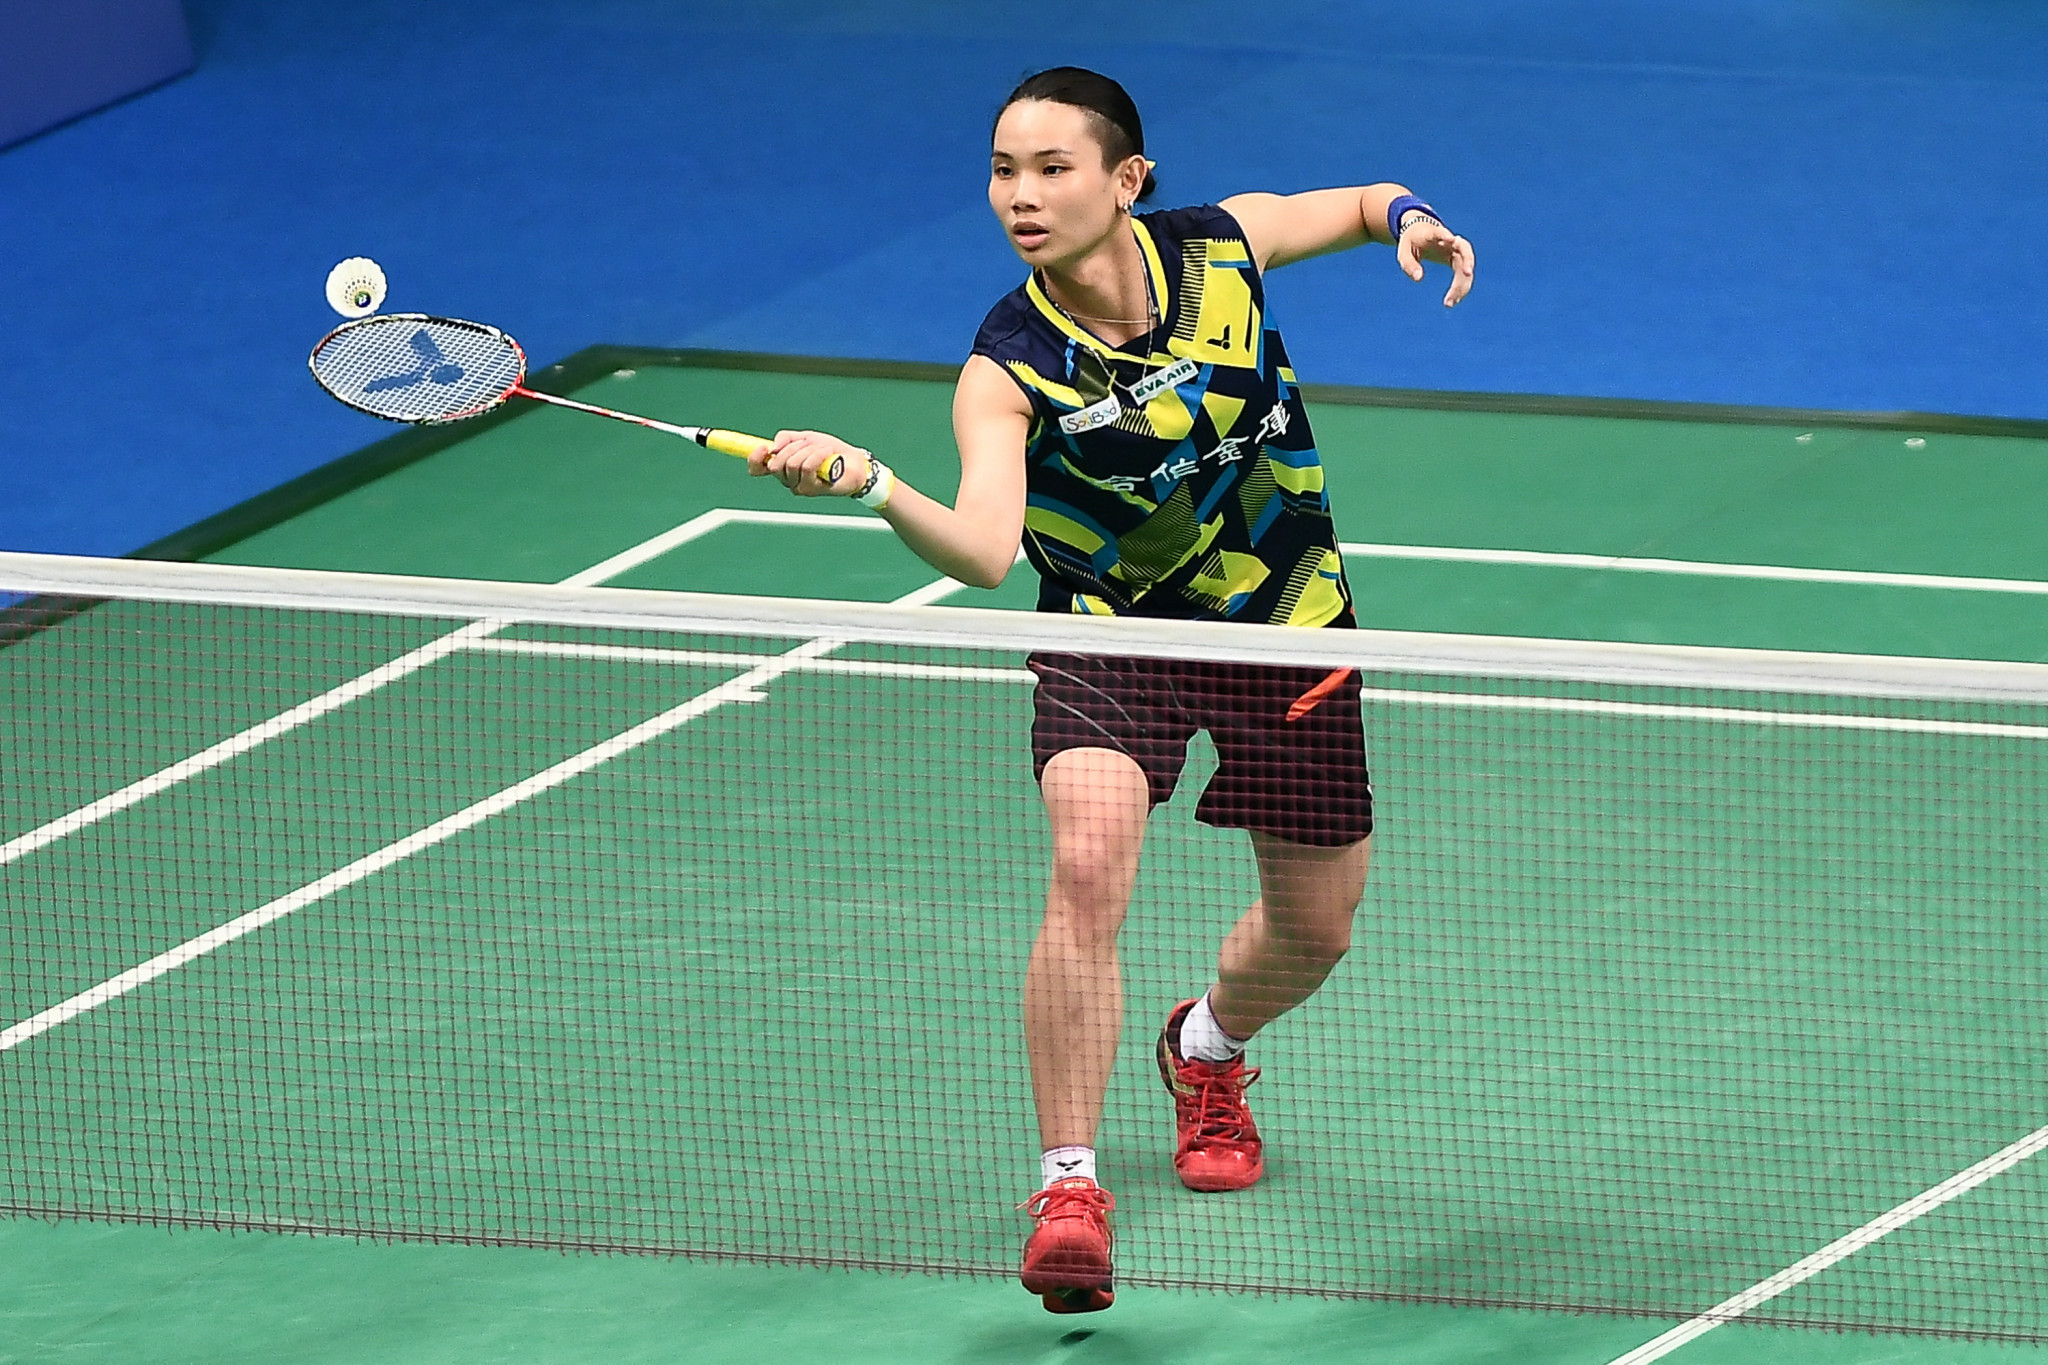 Tai Tzu-Ying enjoyed an impressive straight games victory in her quarter-final match ©Getty Images